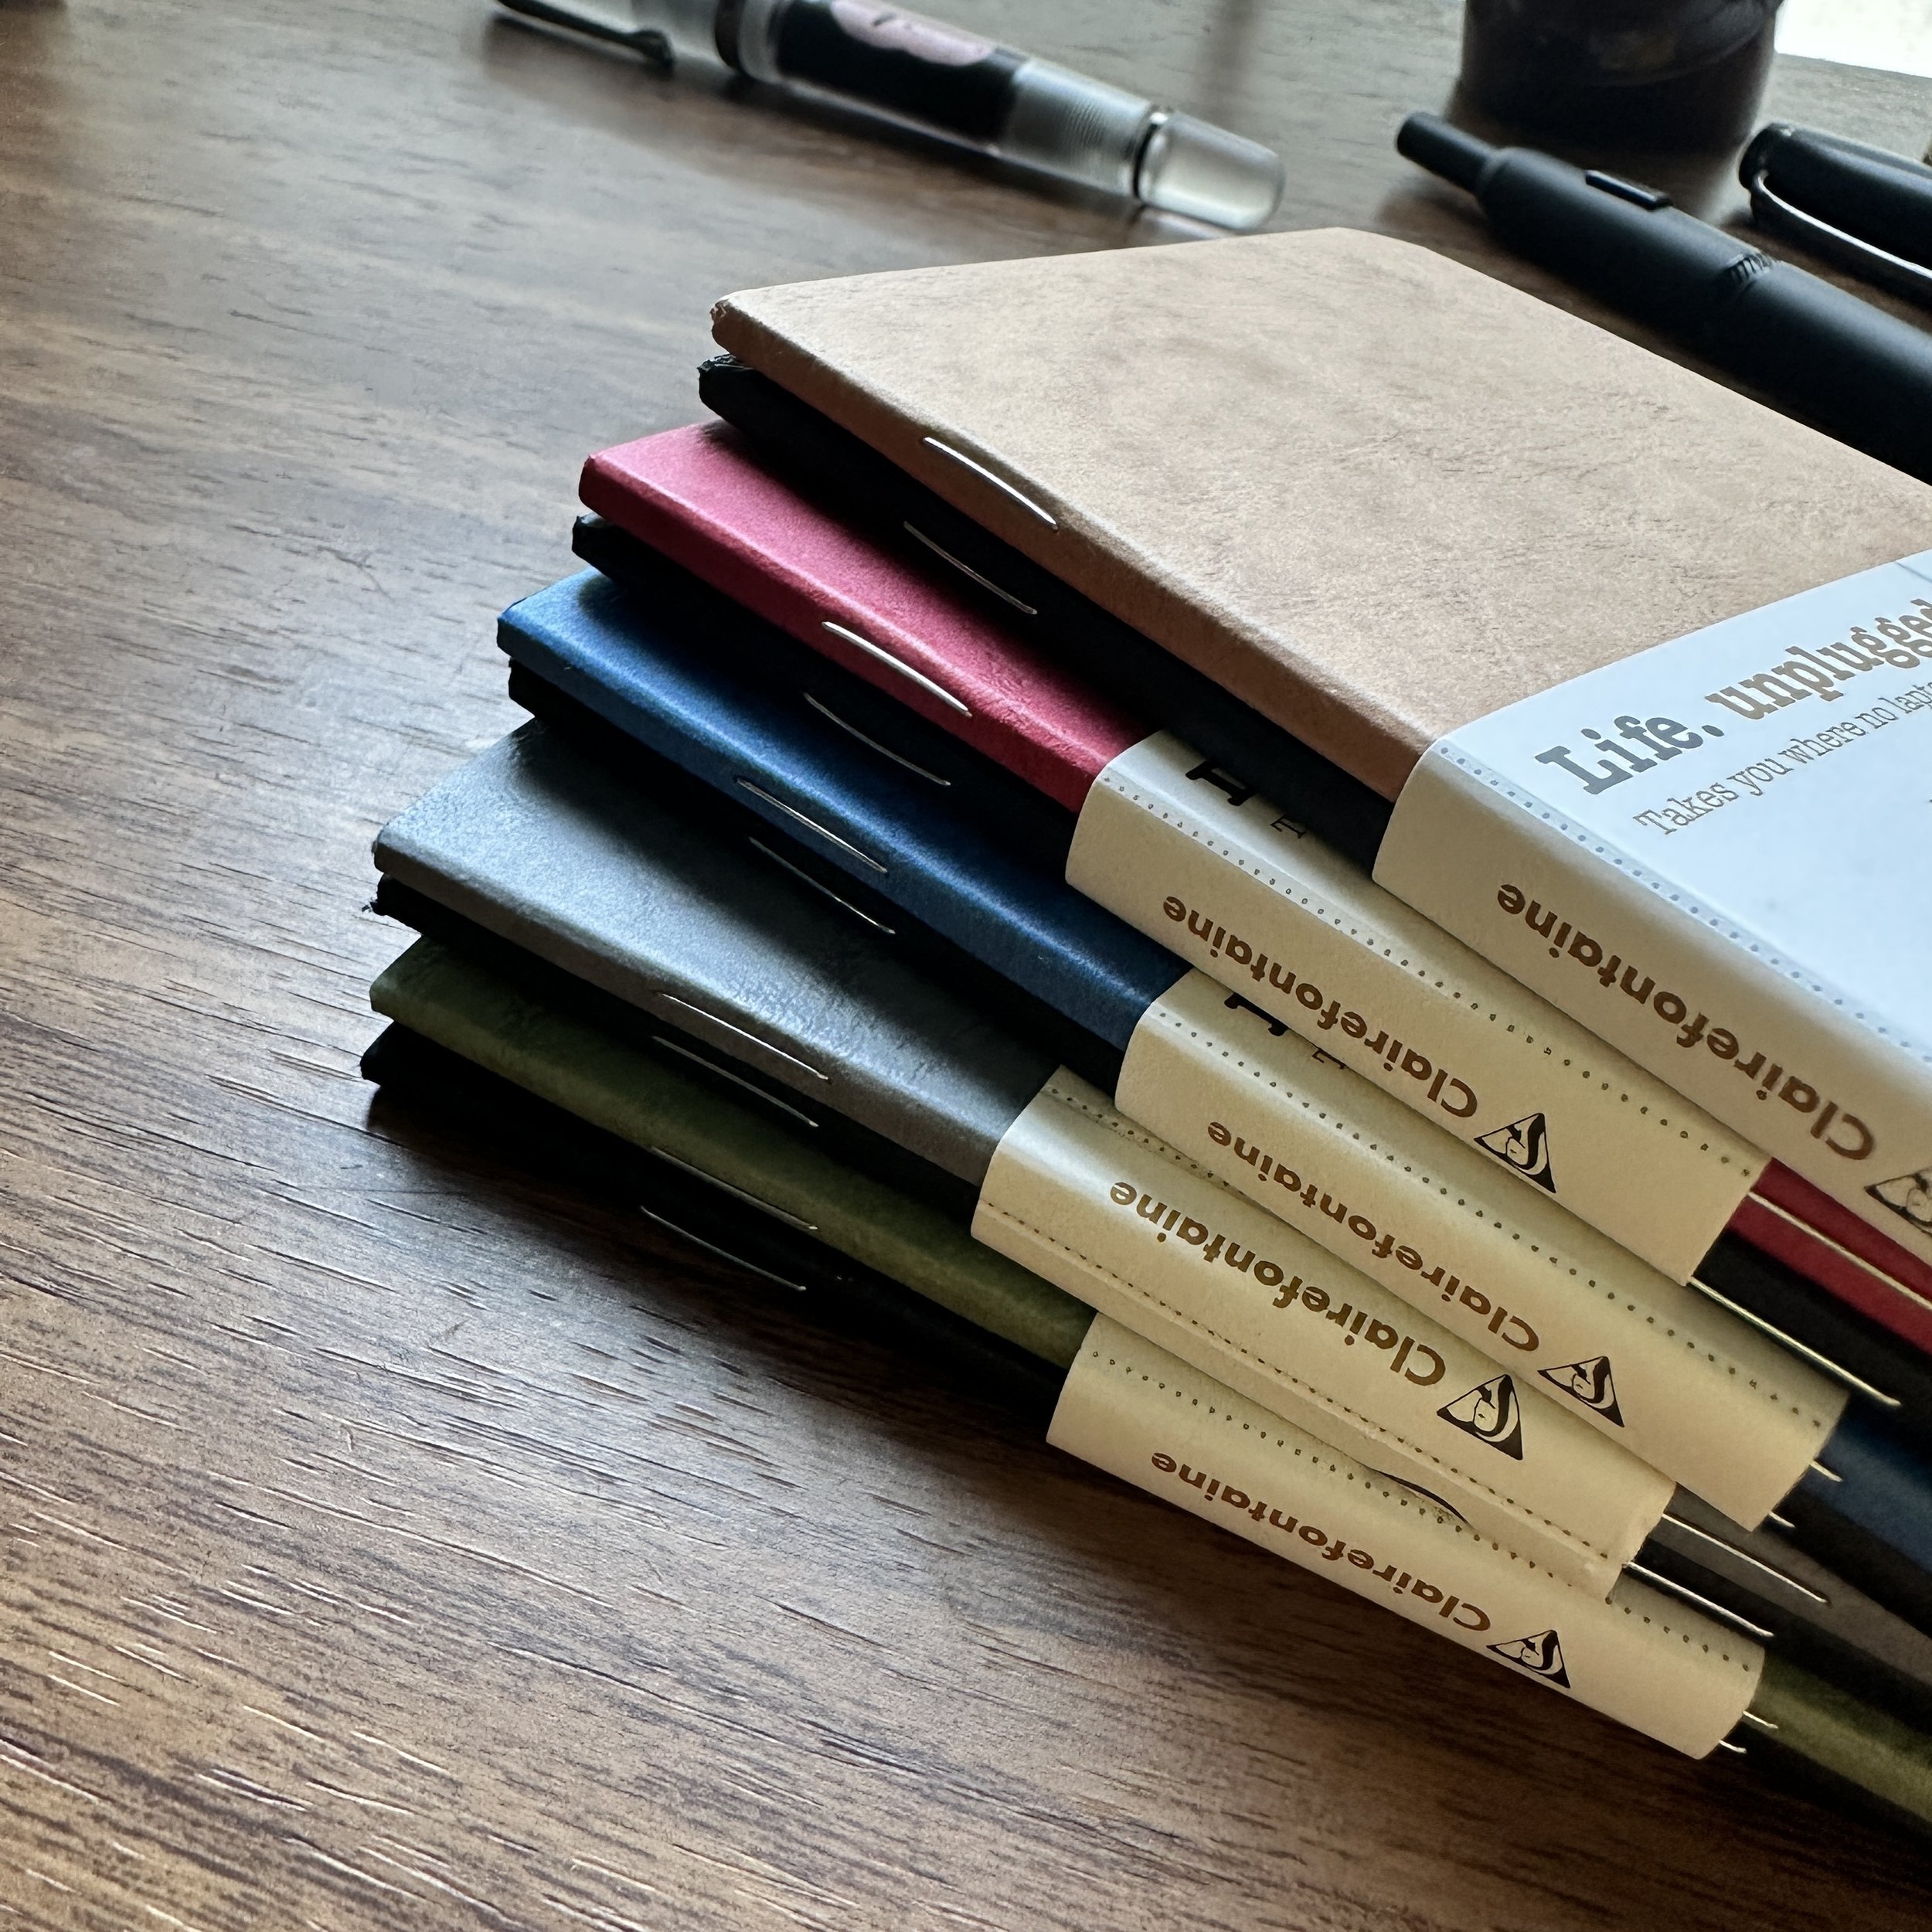 A Comprehensive Review of Writing Instruments (Pens) by Parisian Gentleman